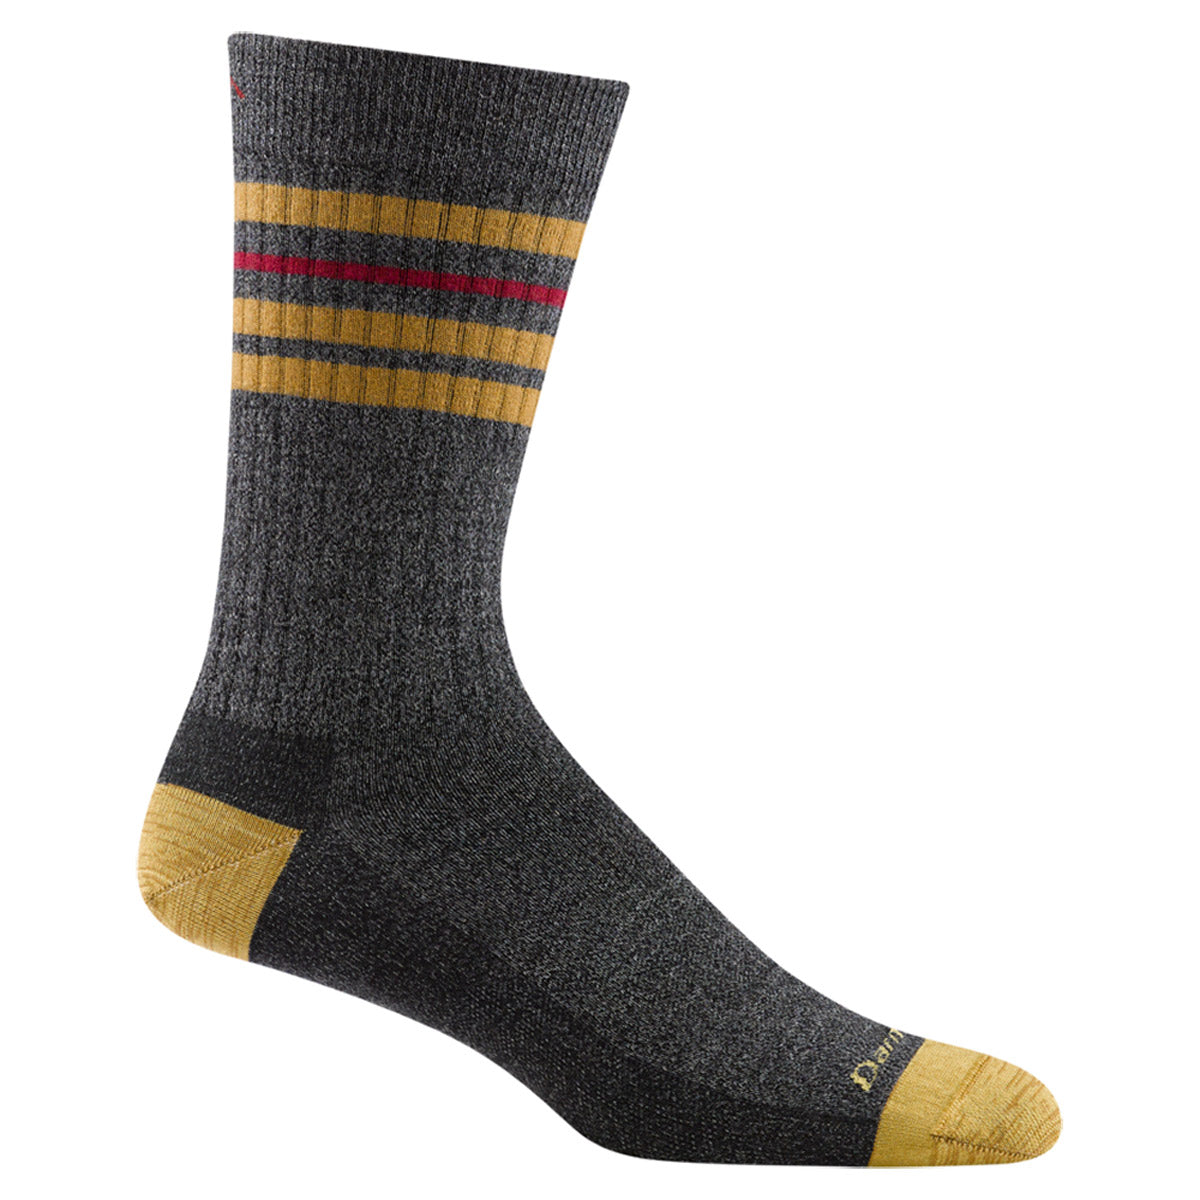 A single Darn Tough Letterman Charcoal Men's athletic performance sock with yellow toe and heel patches and a pattern of yellow and red stripes near the top, crafted from high-loft ultra-supple twisted yarn.